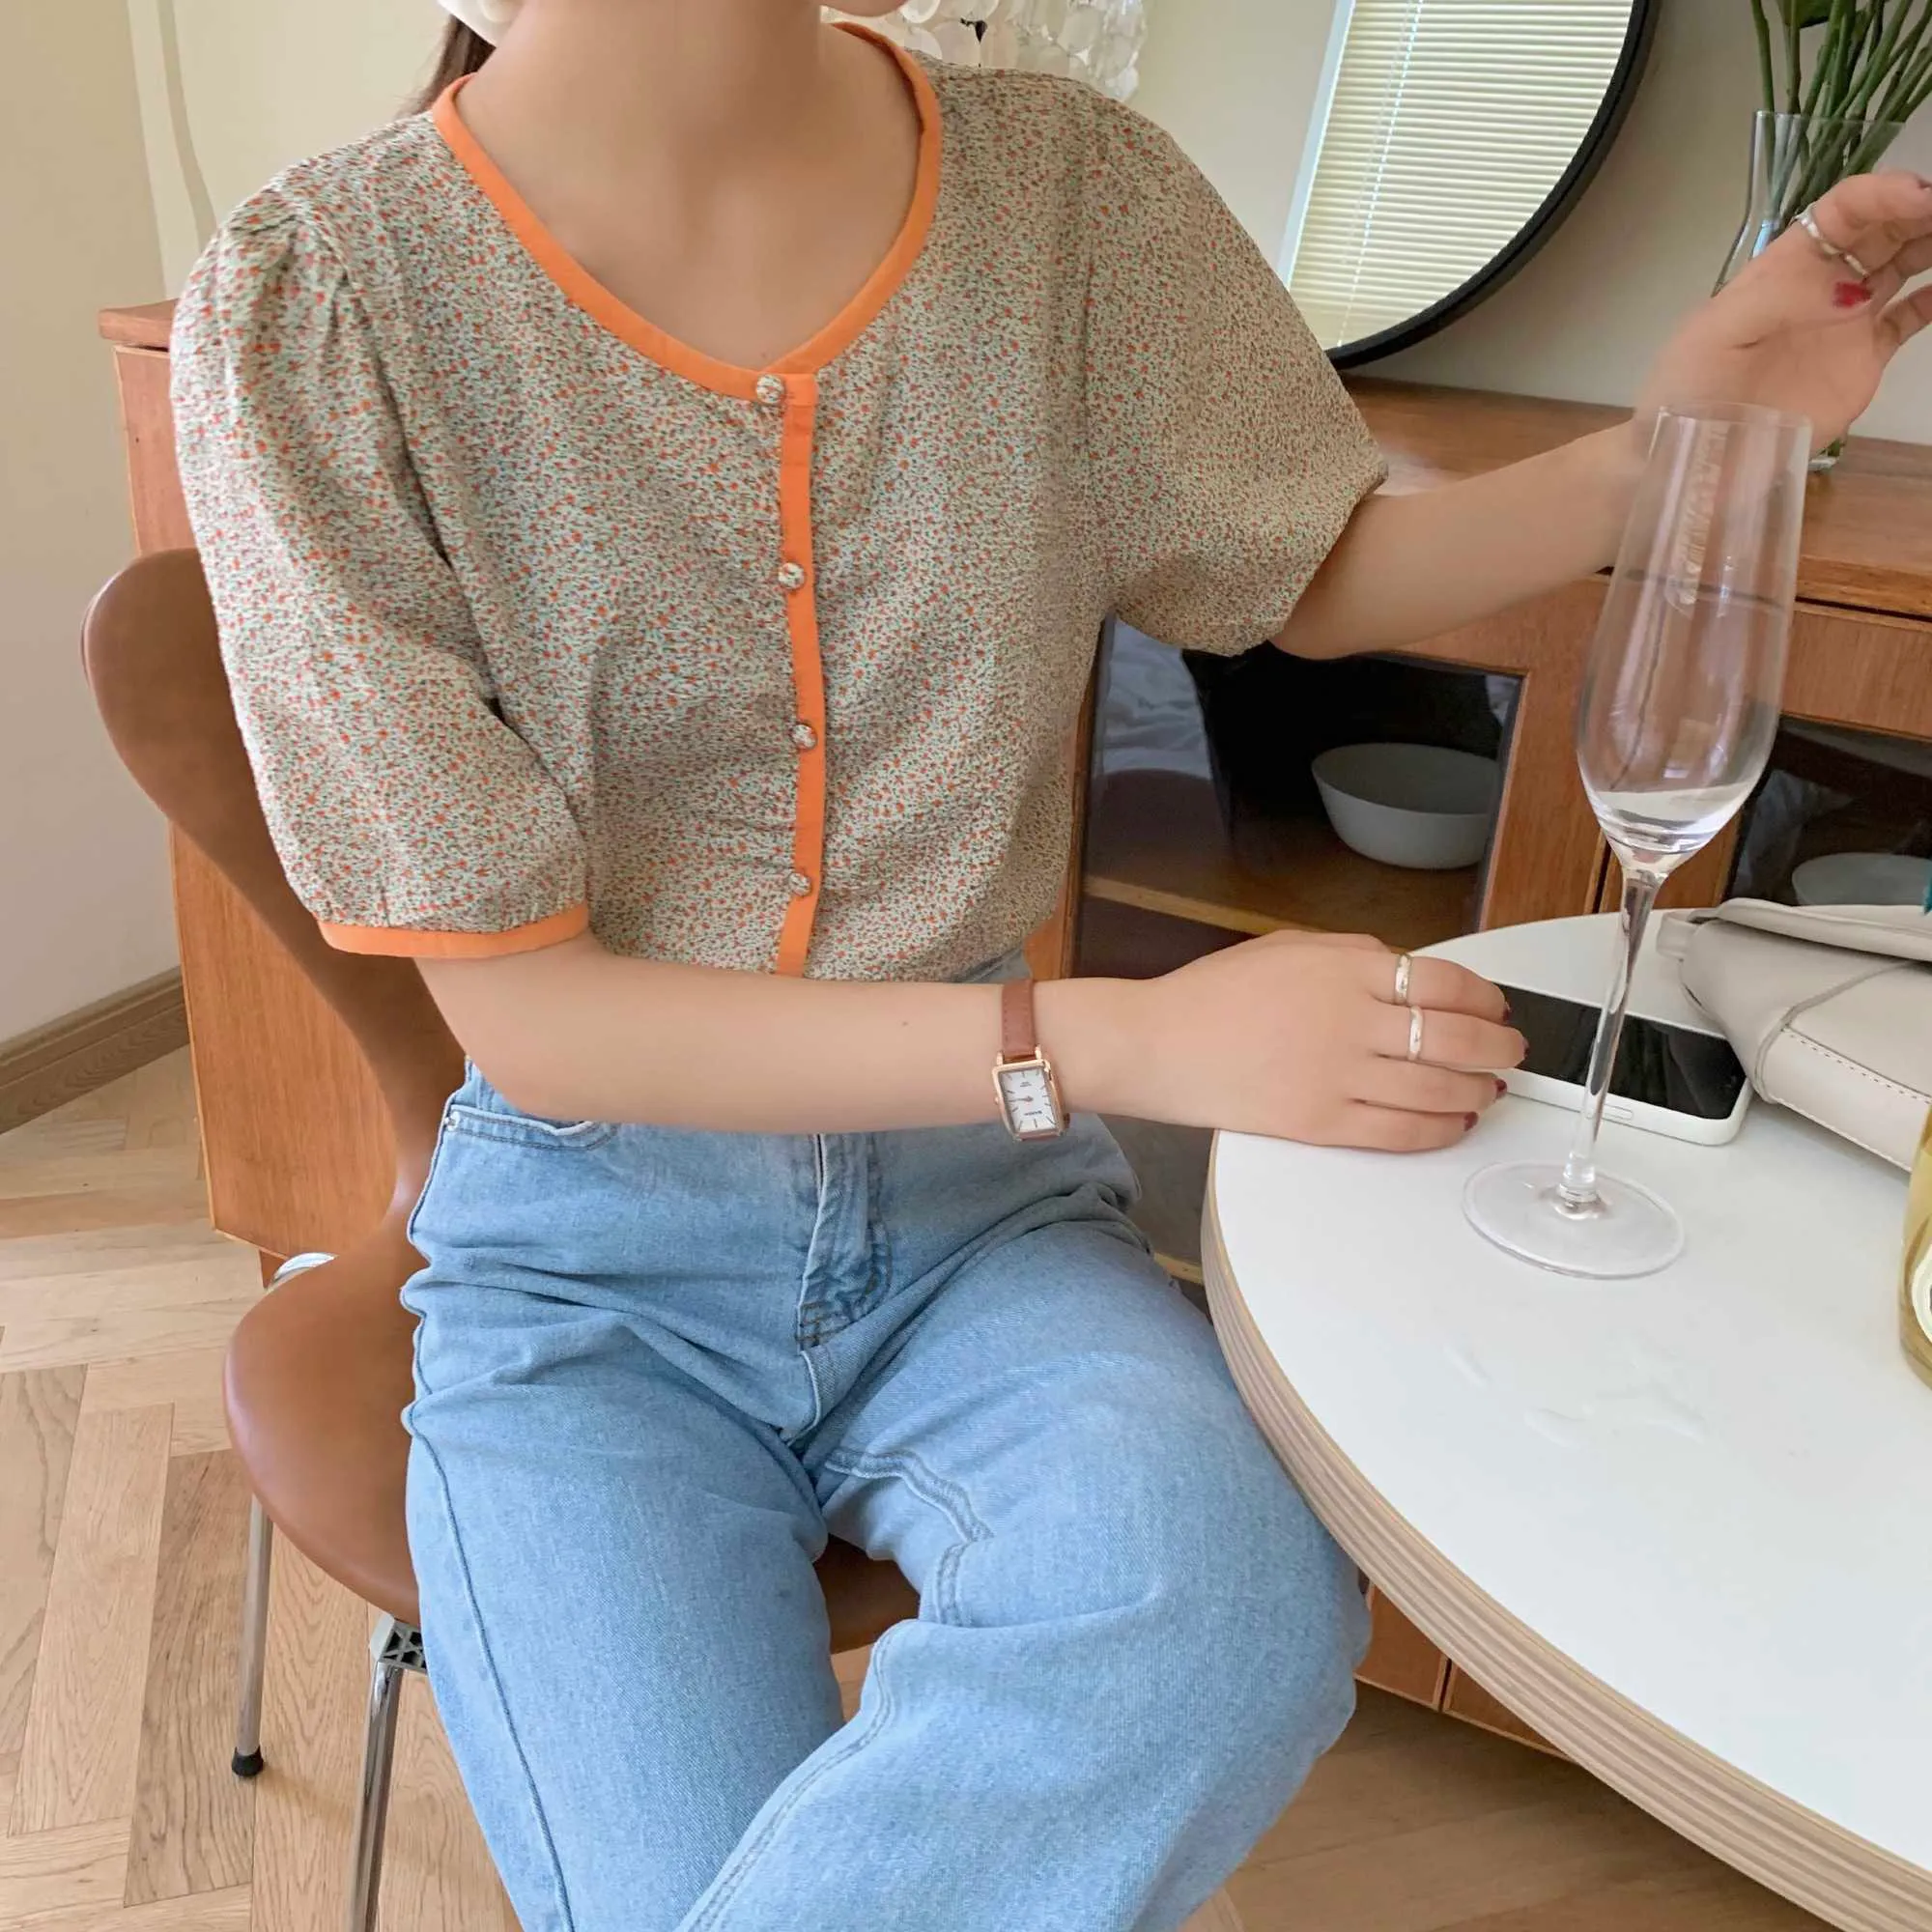 Florals All Match Slim Vintage Printed Shirts Cardigans Elegance Sweet Gentle Summer Chic Office Lady Blouses Tops 210525